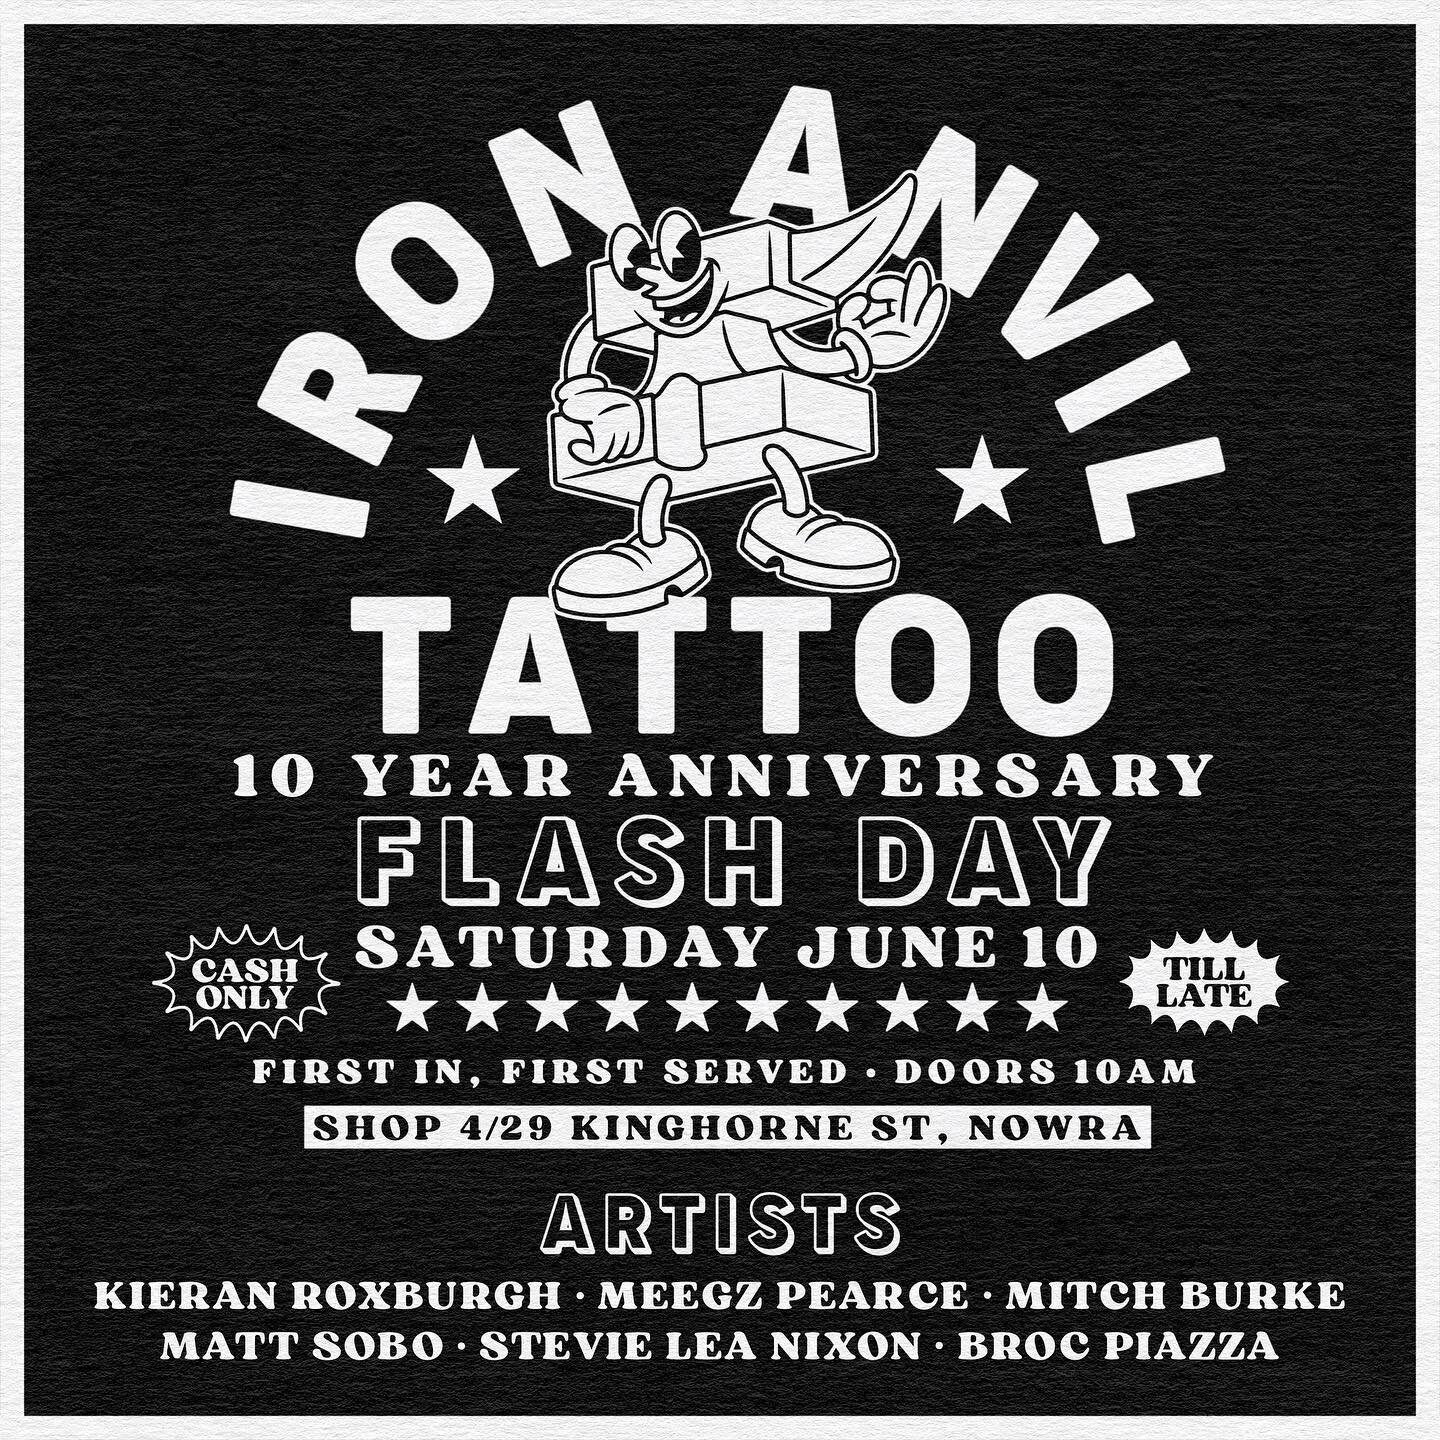 We are super excited to announce that we will be holding a flash day on Saturday the 10th of June to celebrate a decade of IRON ANVIL!

We also have our good friends @gemstone.tattoo and @spicymalonetattoo joining us for the special occasion. 

We ho